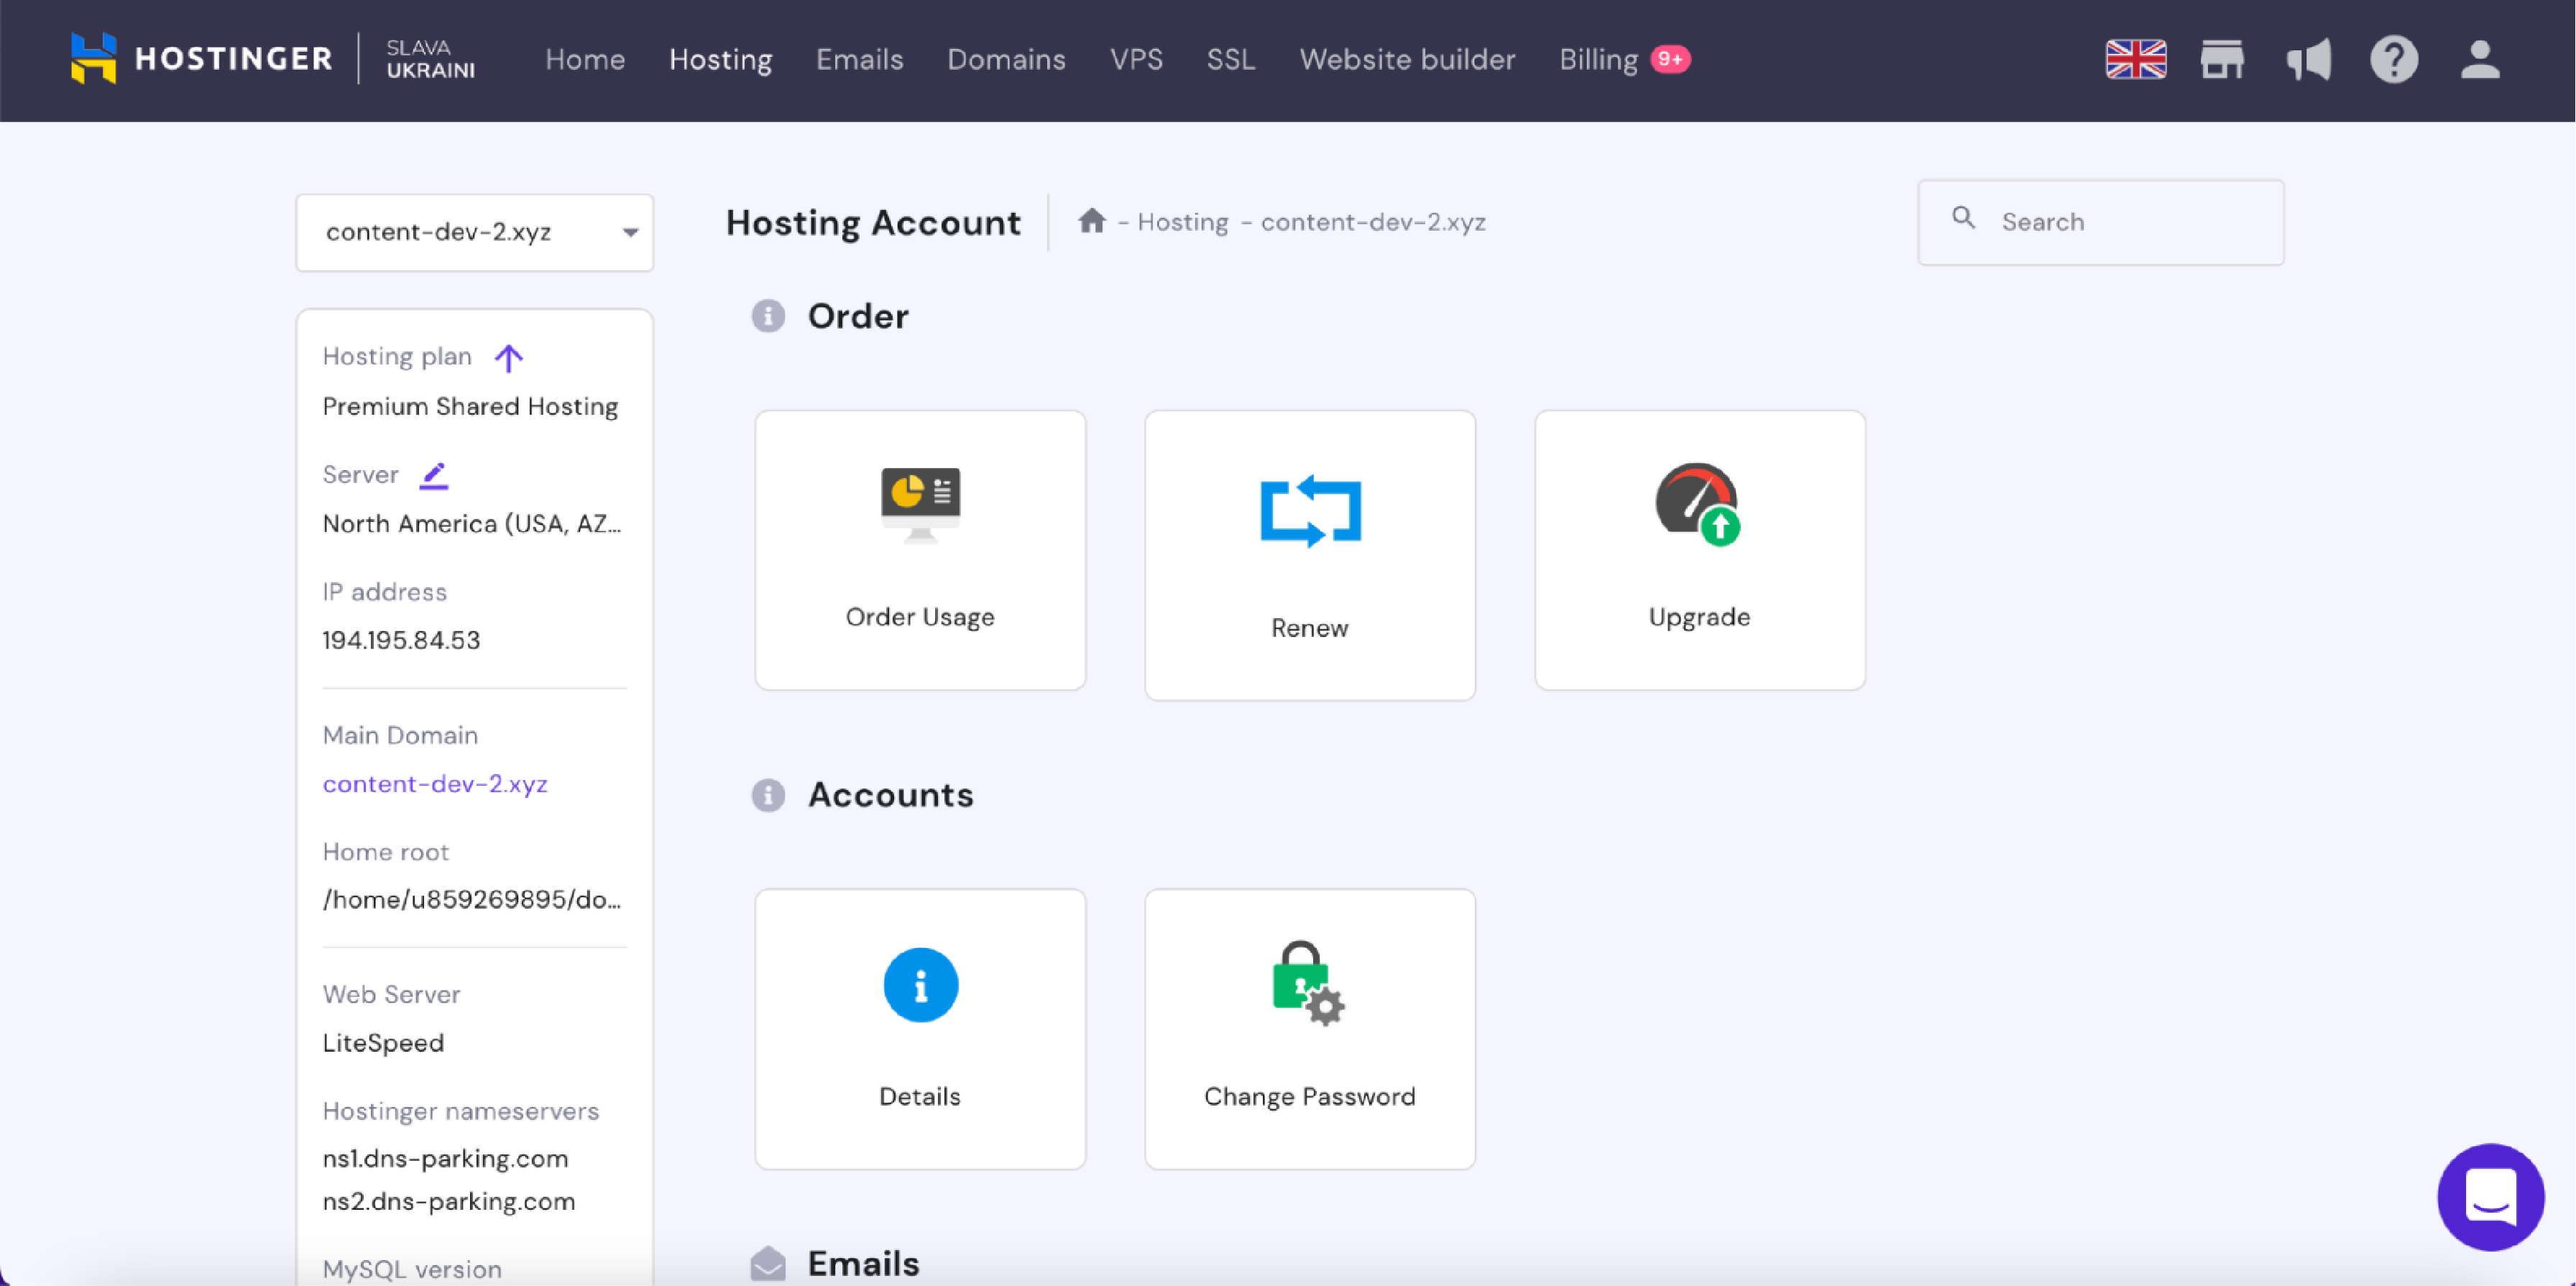 User-friendly hPanel dashboard interface for easy hosting management.